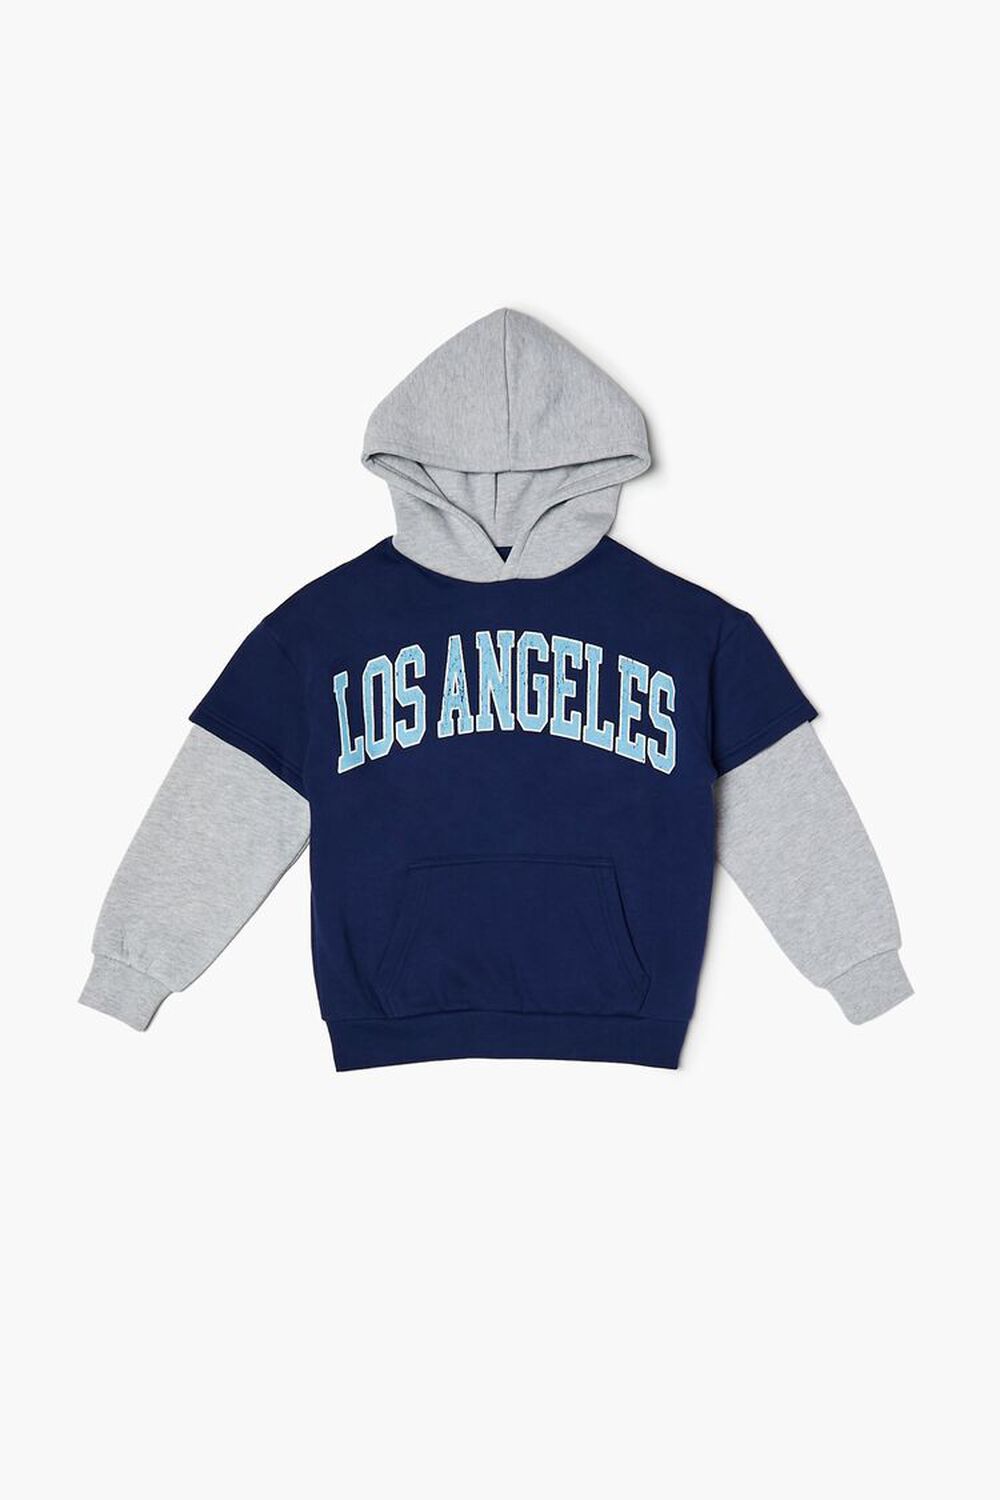  CMIYGL LOS ANGELES LICENSE HOODIE : Clothing, Shoes & Jewelry